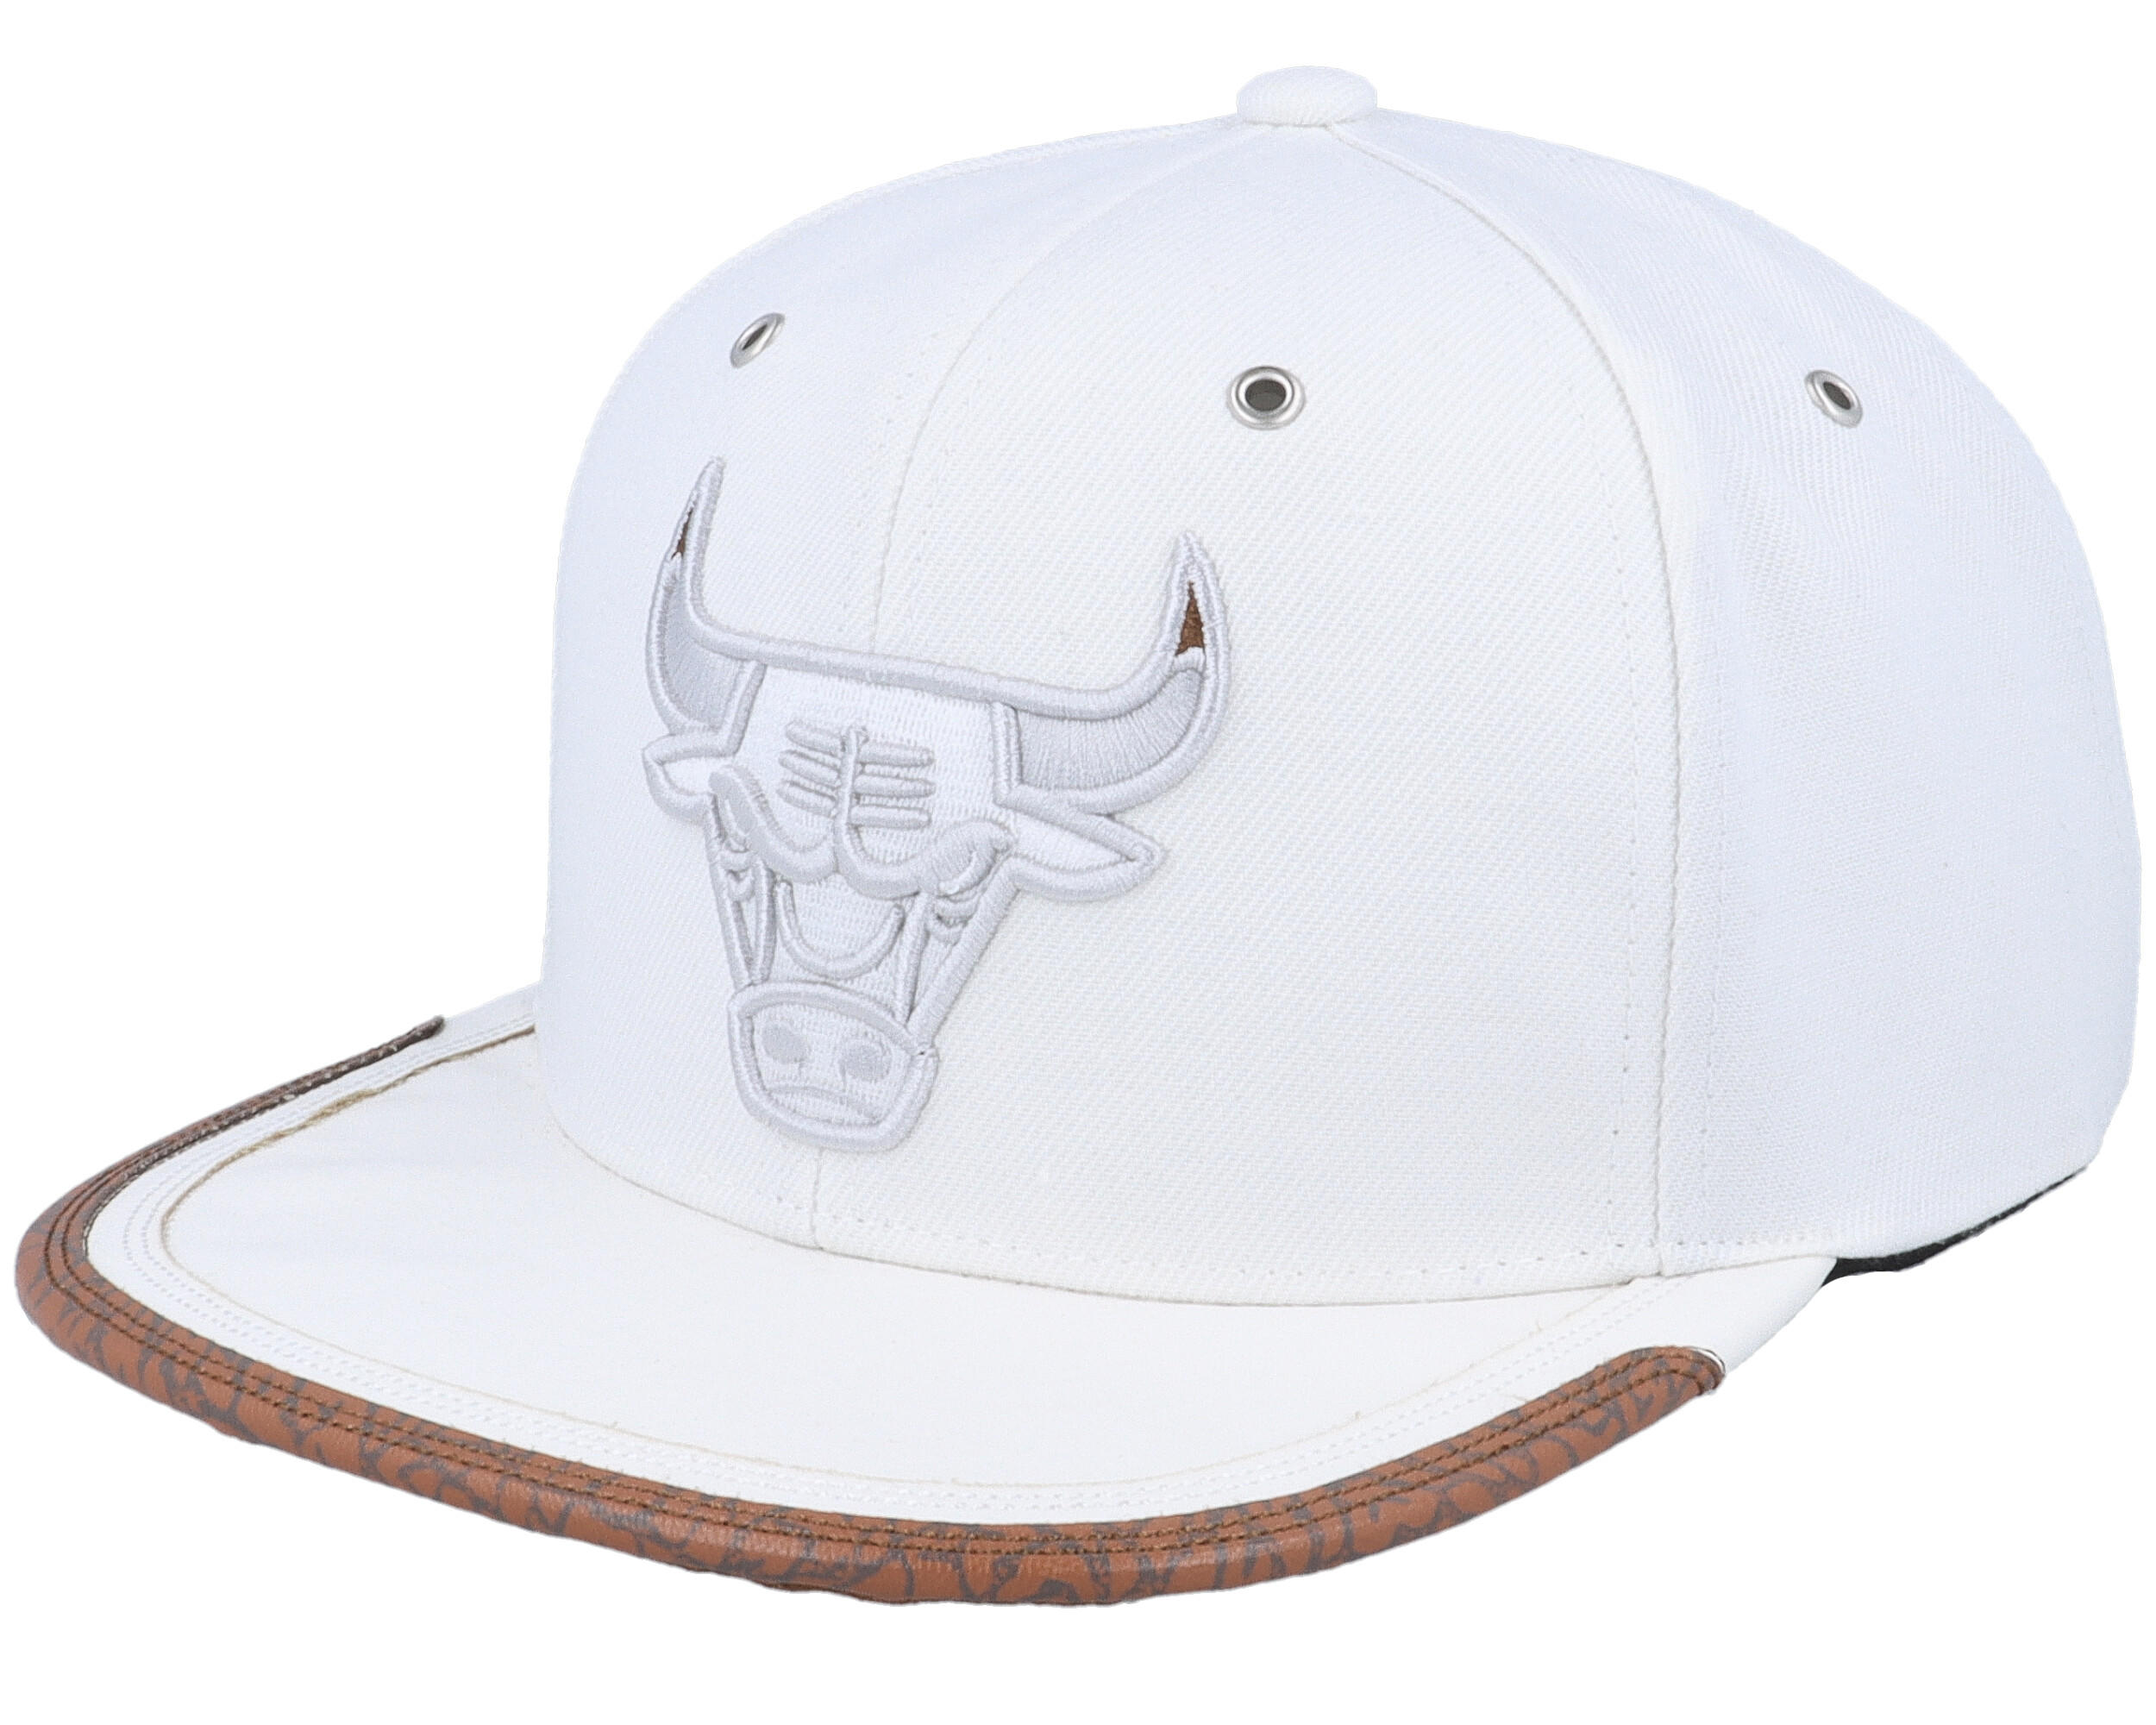  Day 3 Snapback Chicago Bulls : Sports & Outdoors